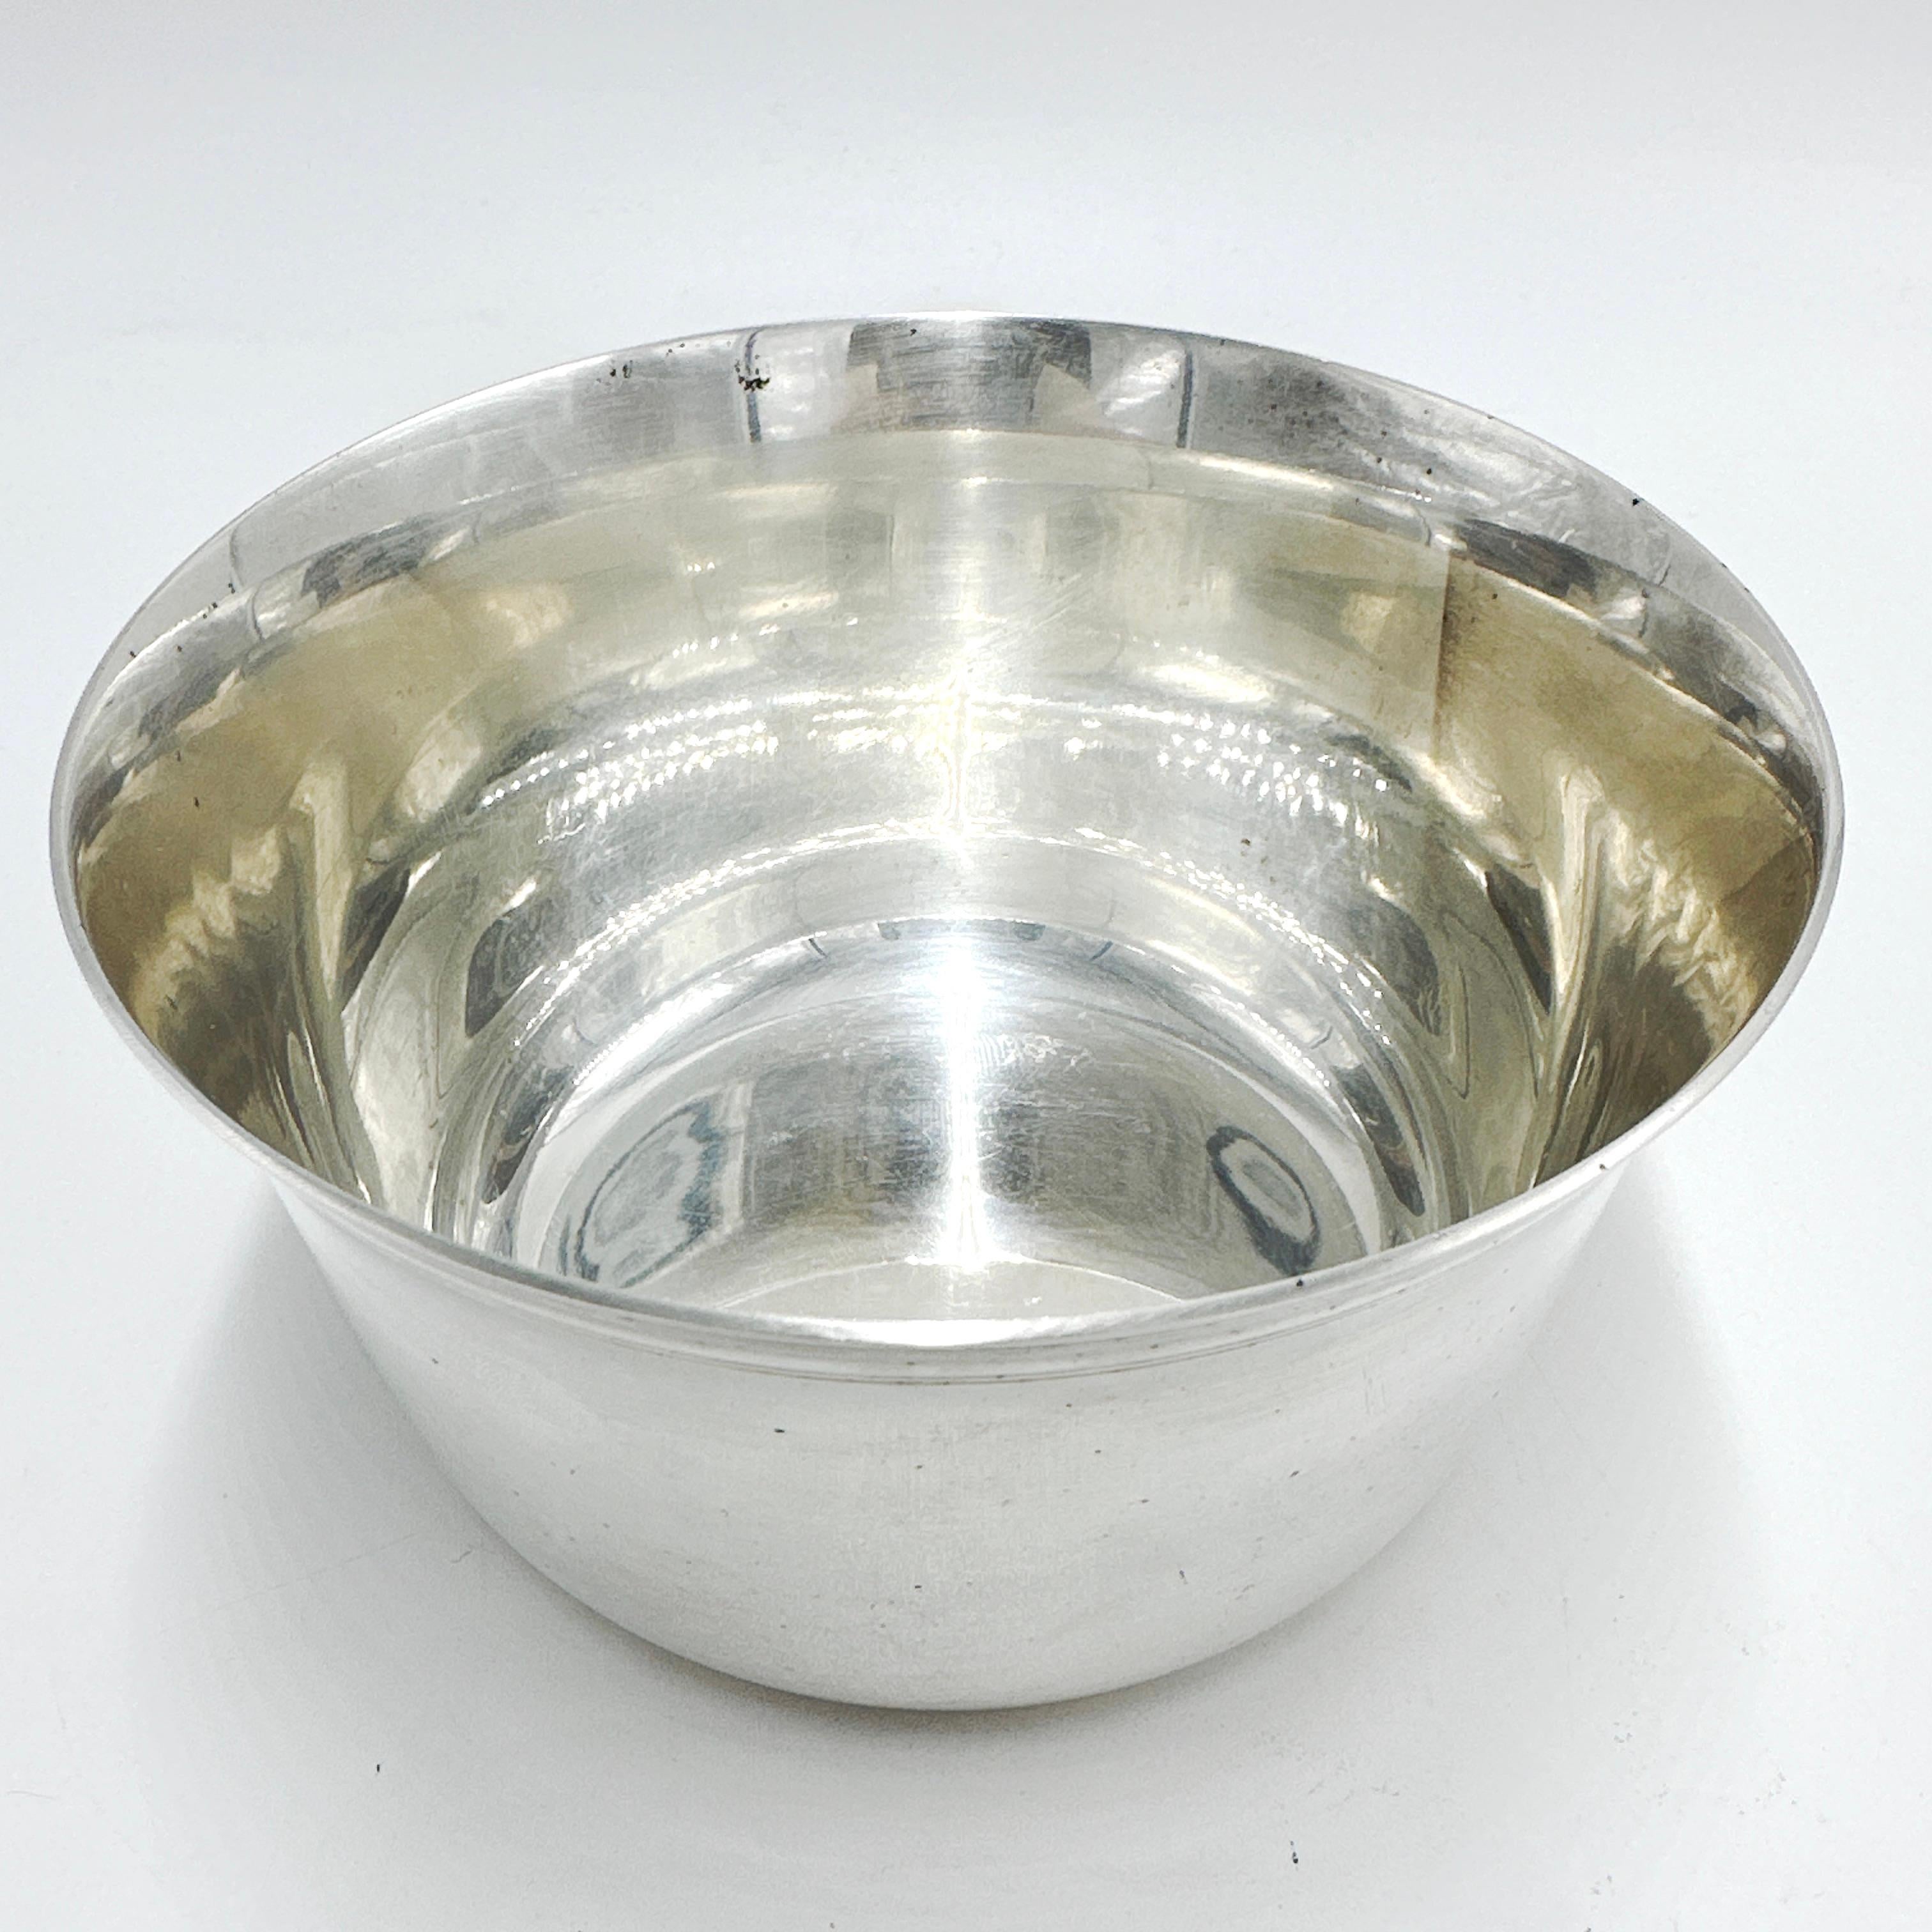 Hermes Silver Metal Bowl, 1980s For Sale 2